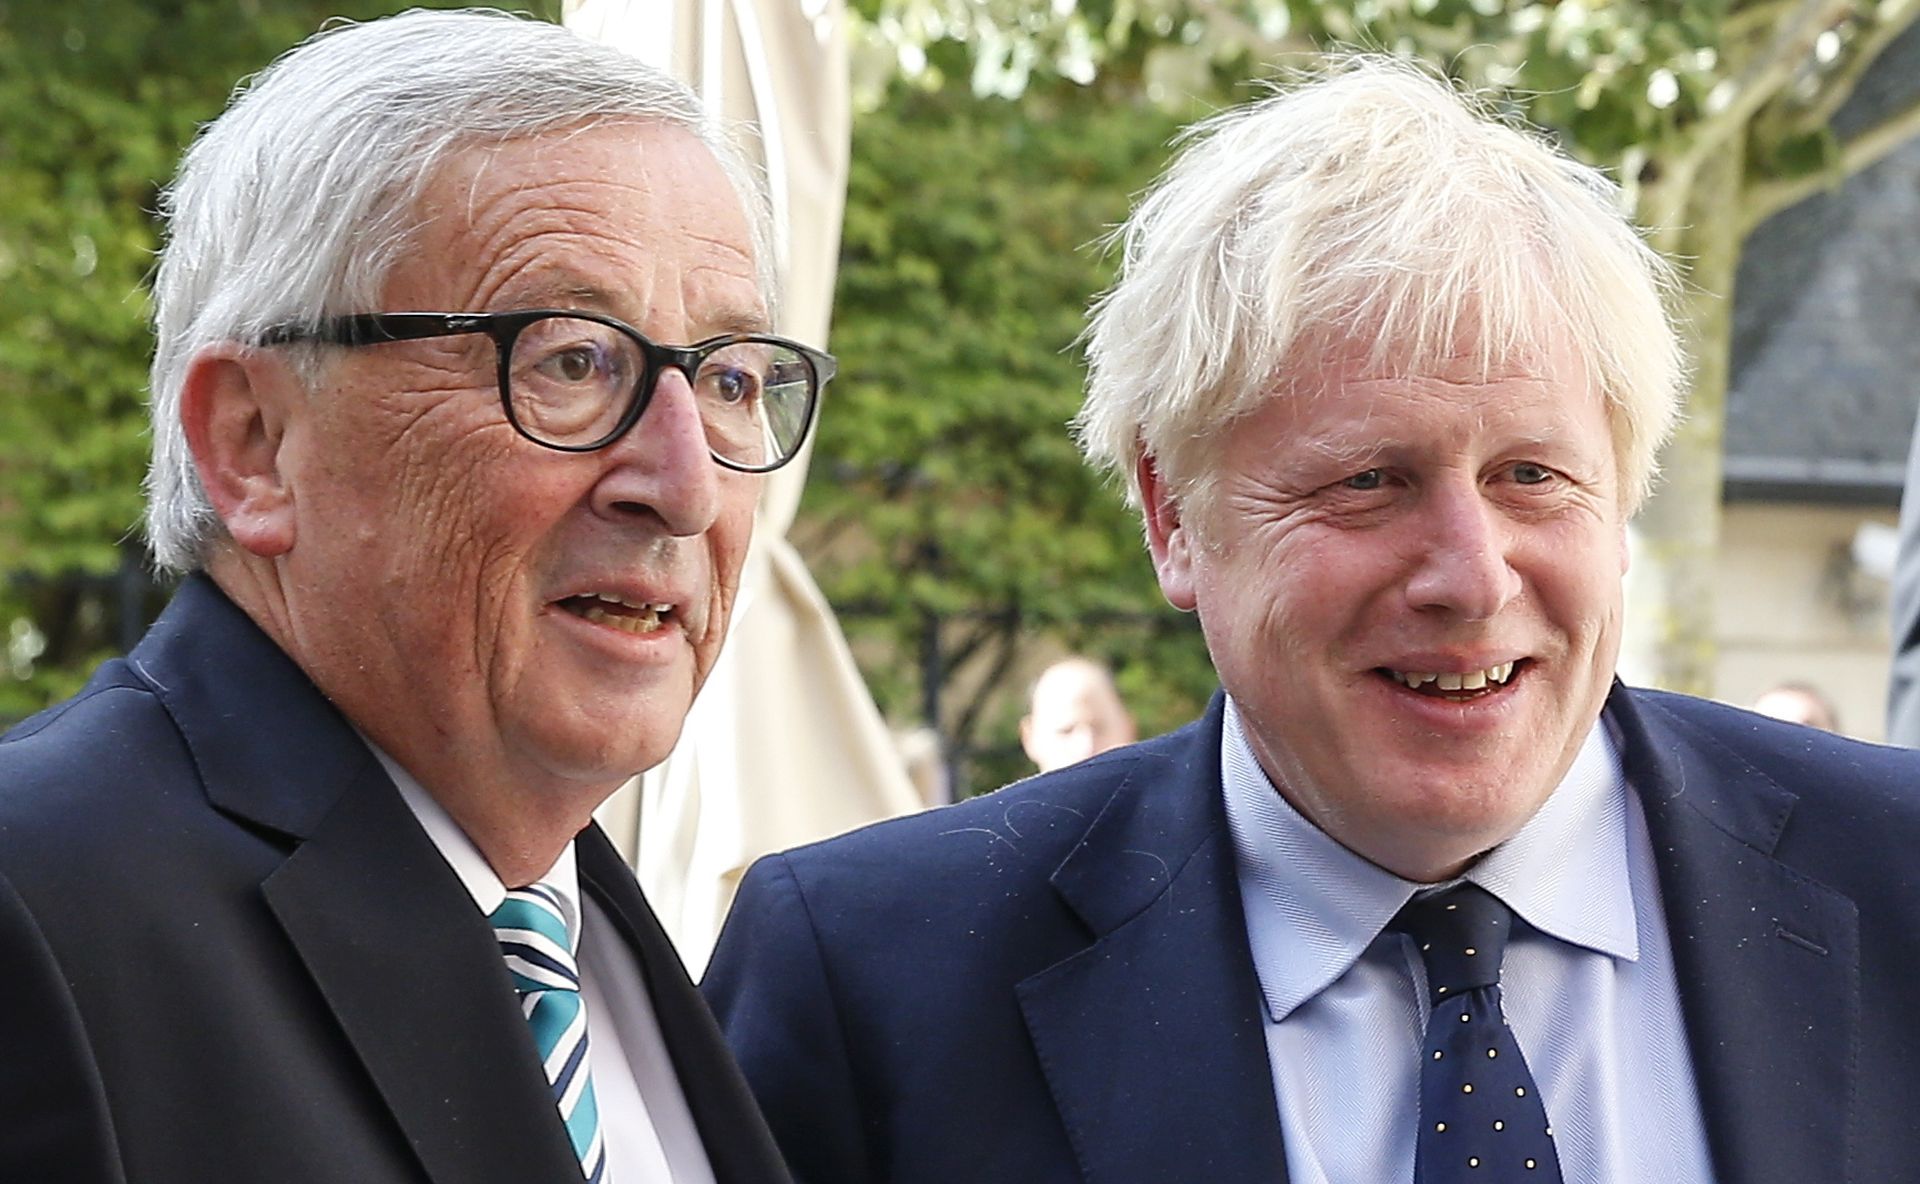 epa07846298 Acting European Commission President Jean-Claude Juncker (L) welcomes British Prime Minister Boris Johnson (R) for a meeting in Luxembourg, 16 September 2019. British Prime Minister Boris Johnson is on a one-day visit in Luxembourg to discuss the United Kingdom leaving the European Union, dubbed Brexit.  EPA/JULIEN WARNAND